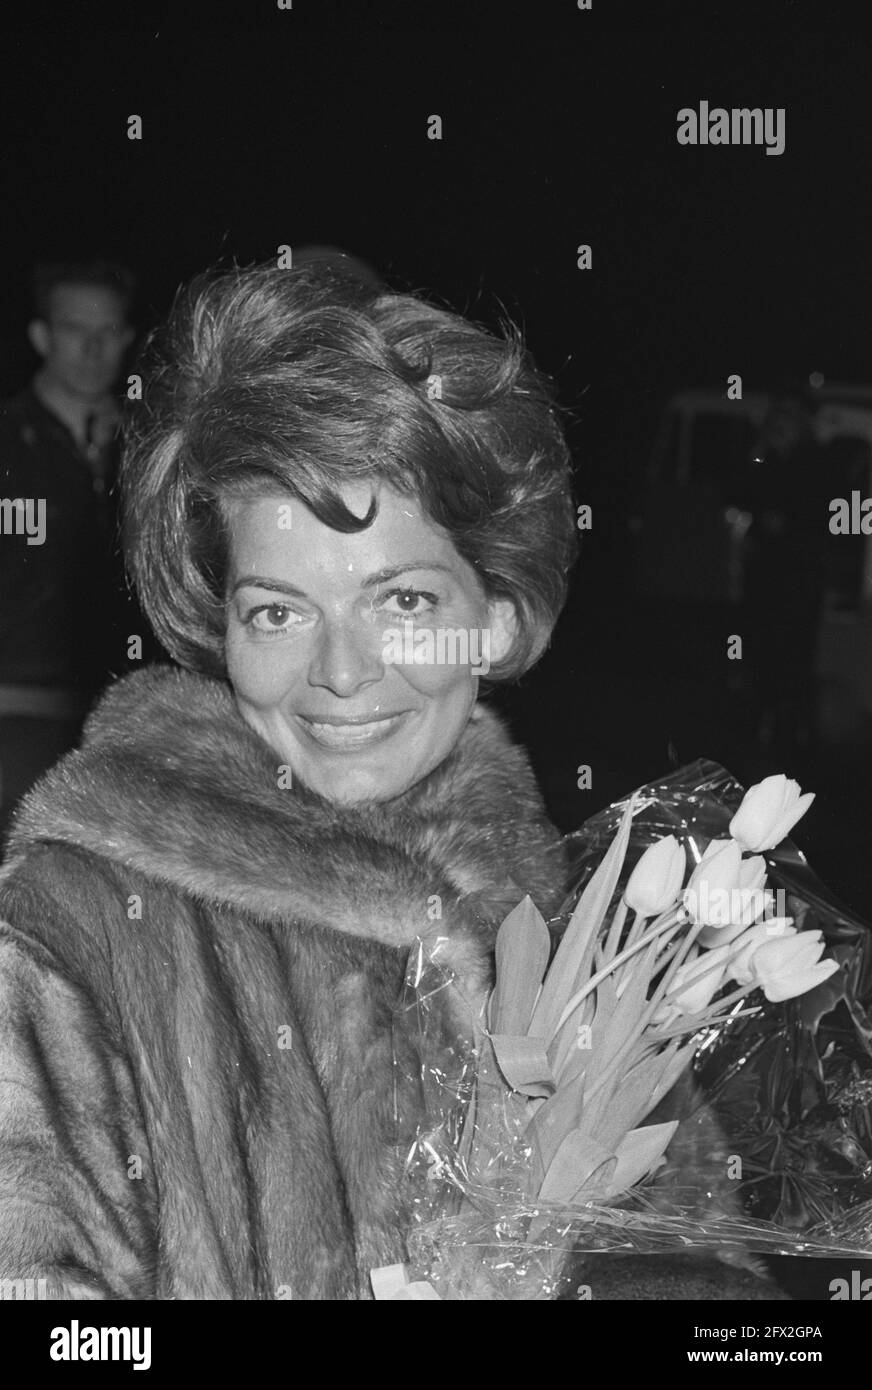 Lys Assia back in the Netherlands. Lys Assia (head) nr. 7, 15 March 1963, The Netherlands, 20th century press agency photo, news to remember, documentary, historic photography 1945-1990, visual stories, human history of the Twentieth Century, capturing moments in time Stock Photo